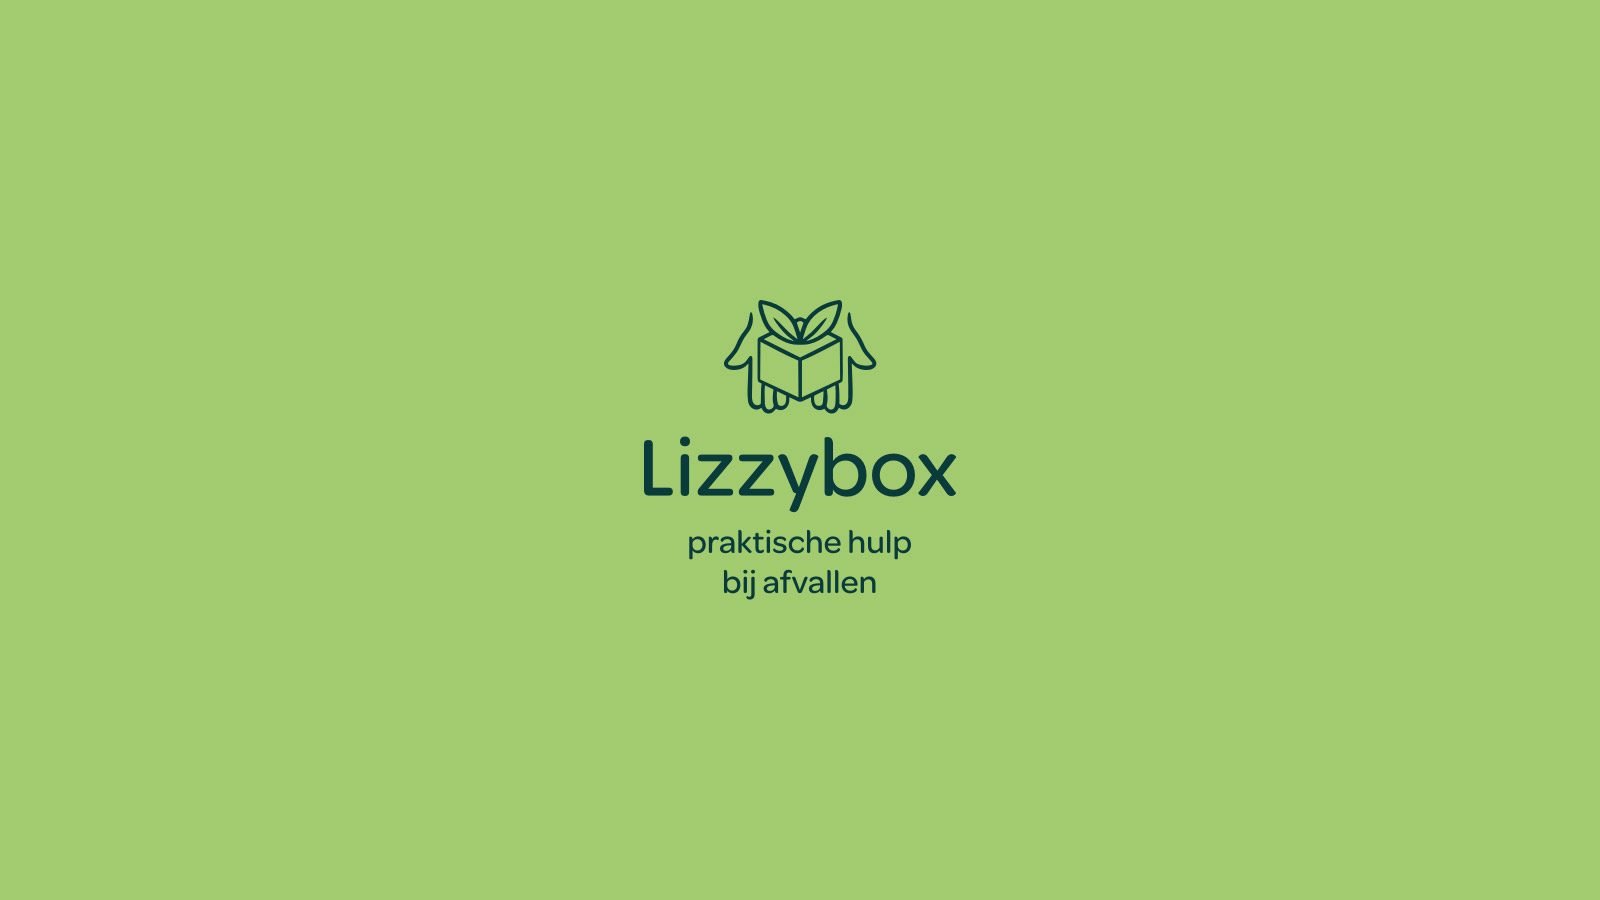  A colorful brand identity for getting healthy with Lizzybox